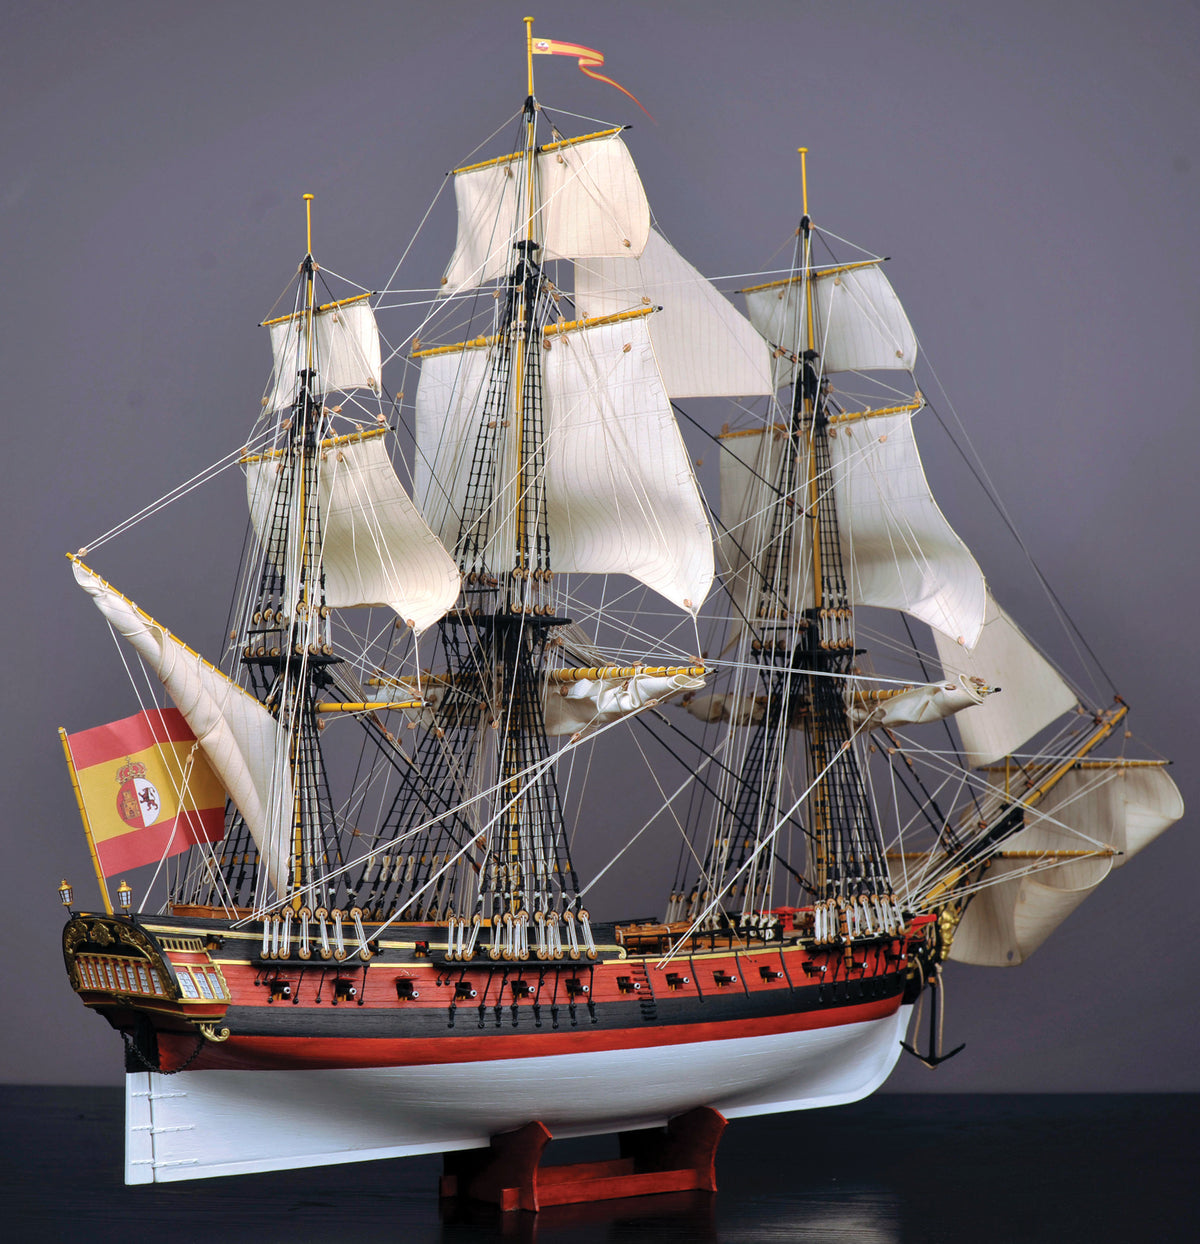 Image of the SANTA LEOCADIA Card Model Kit by Shipyard, showcasing the detailed laser-cut frame and high-quality card components for an authentic model building experience.